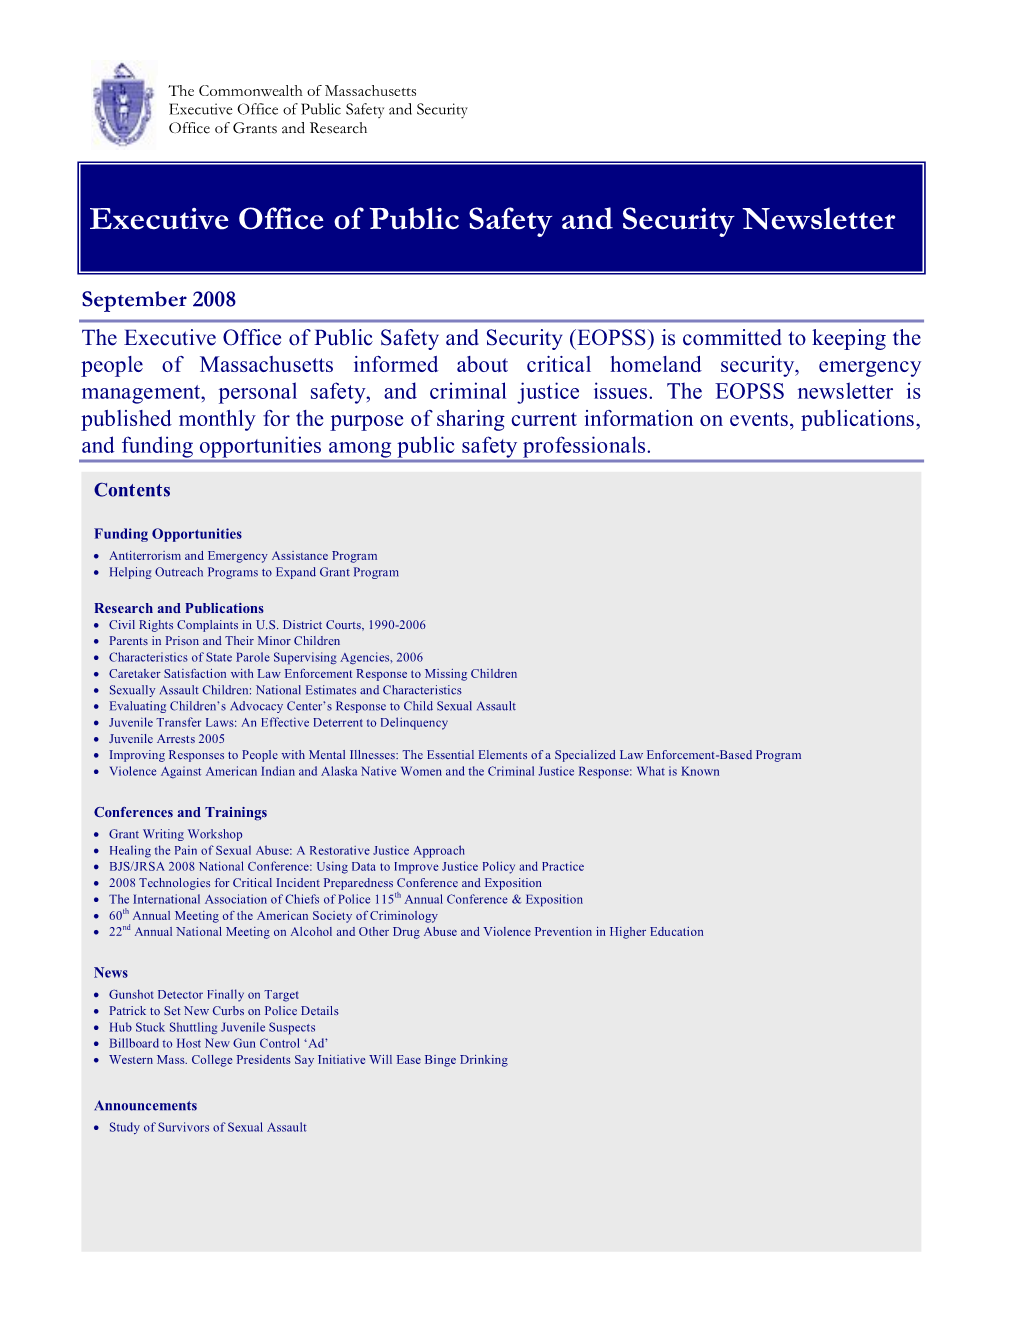 Executive Office of Public Safety and Security Newsletter